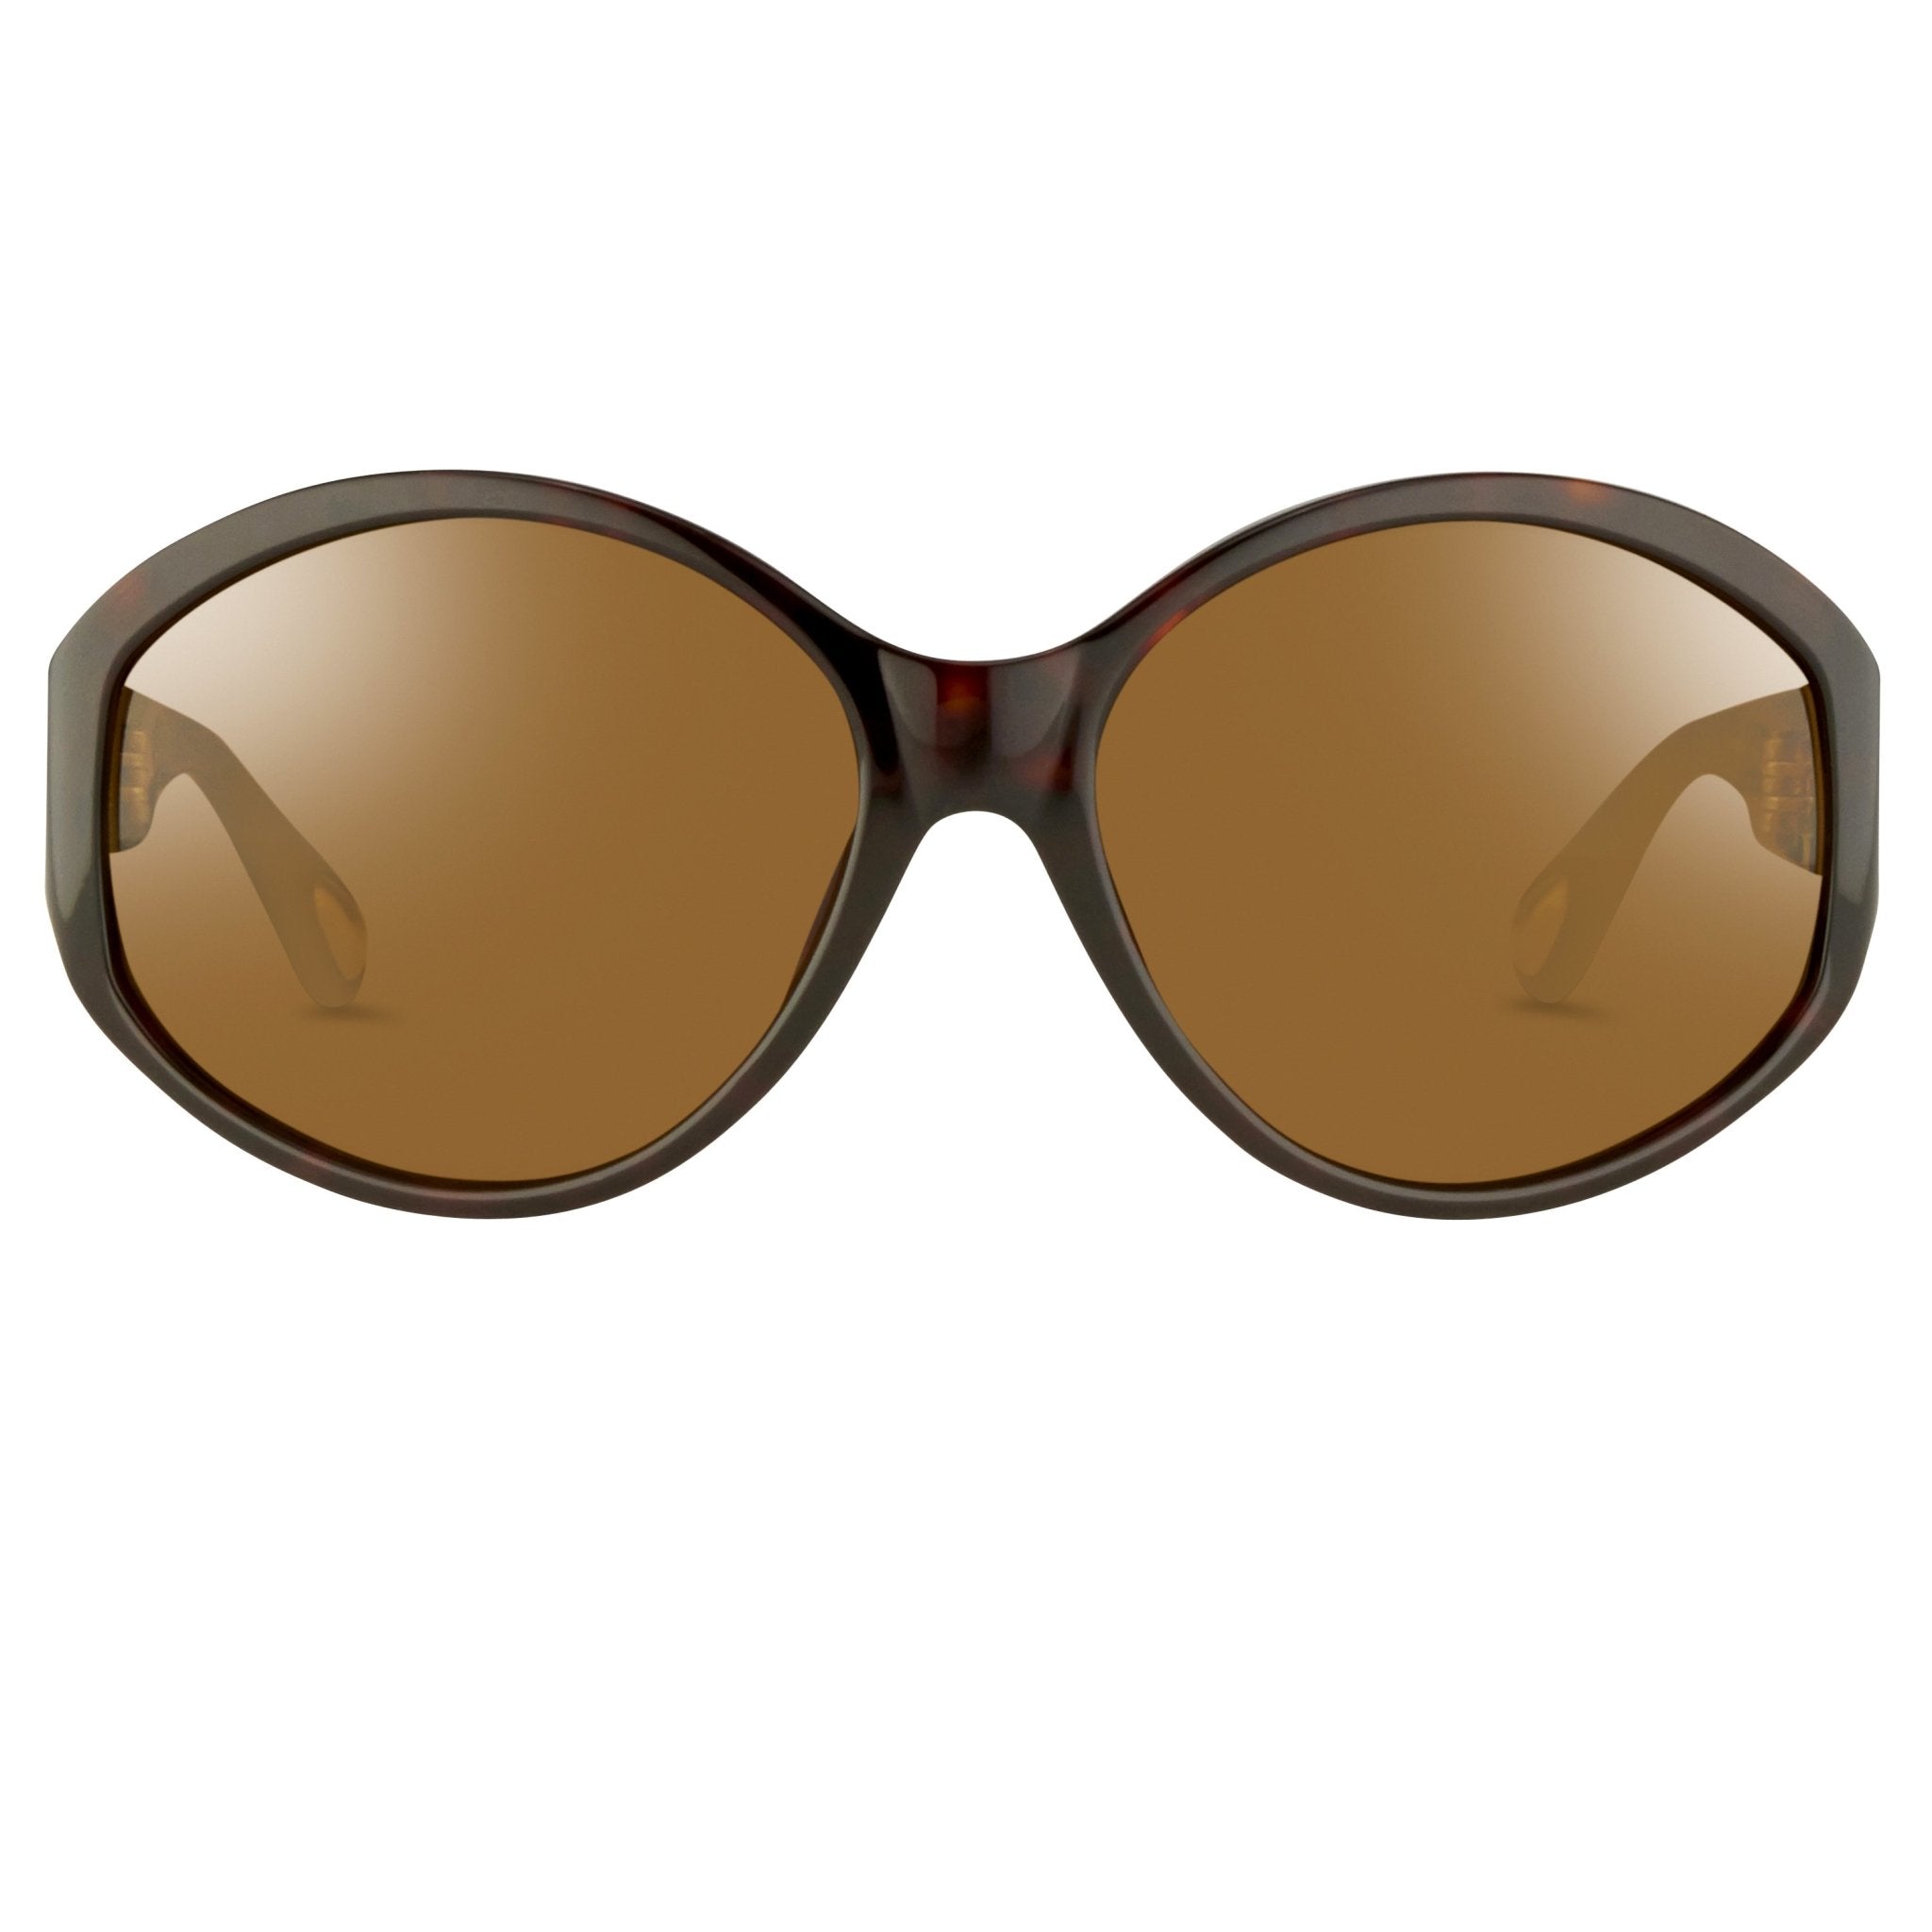 Ann Demeulemeester Sunglasses Oversized Tortoise Shell 925 Silver with Brown Lenses Category 3 AD6C4SUN - Watches & Crystals